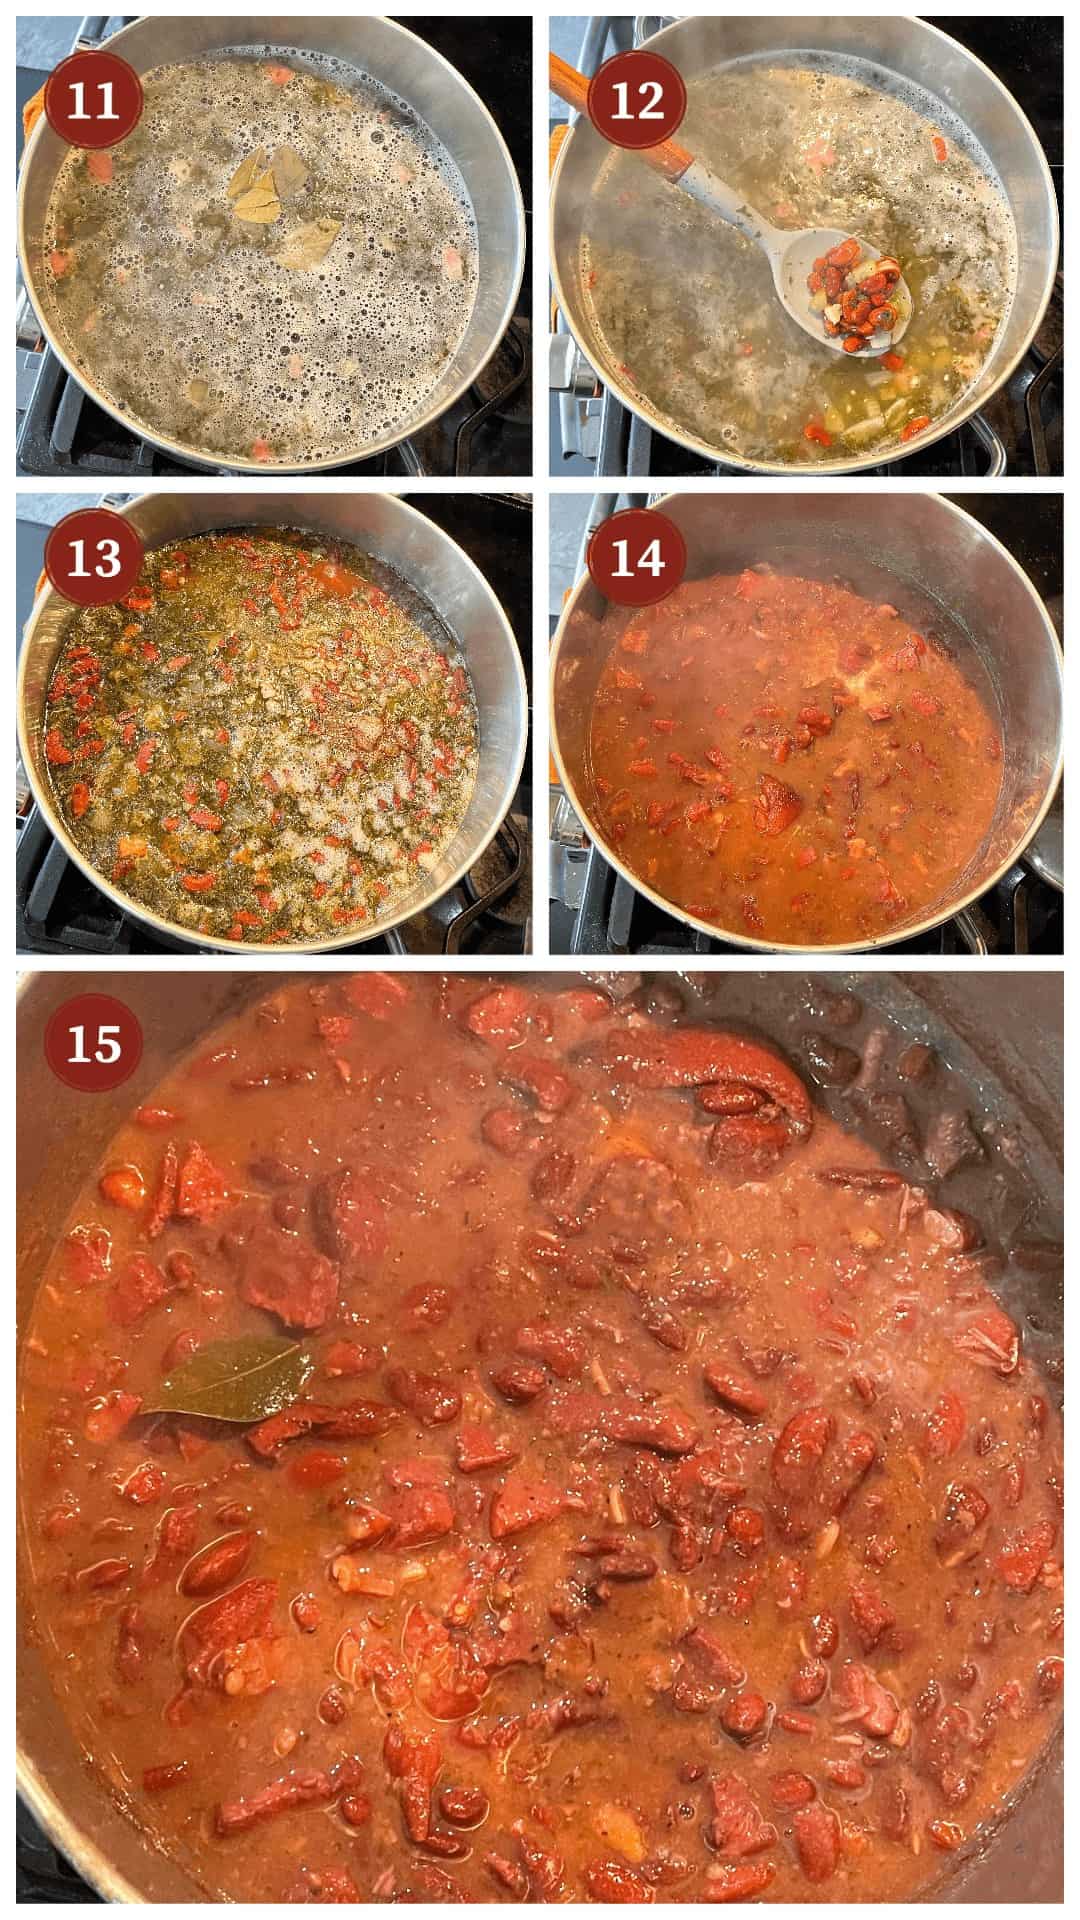 A collage of images showing how to make red beans and rice, steps 11-15.